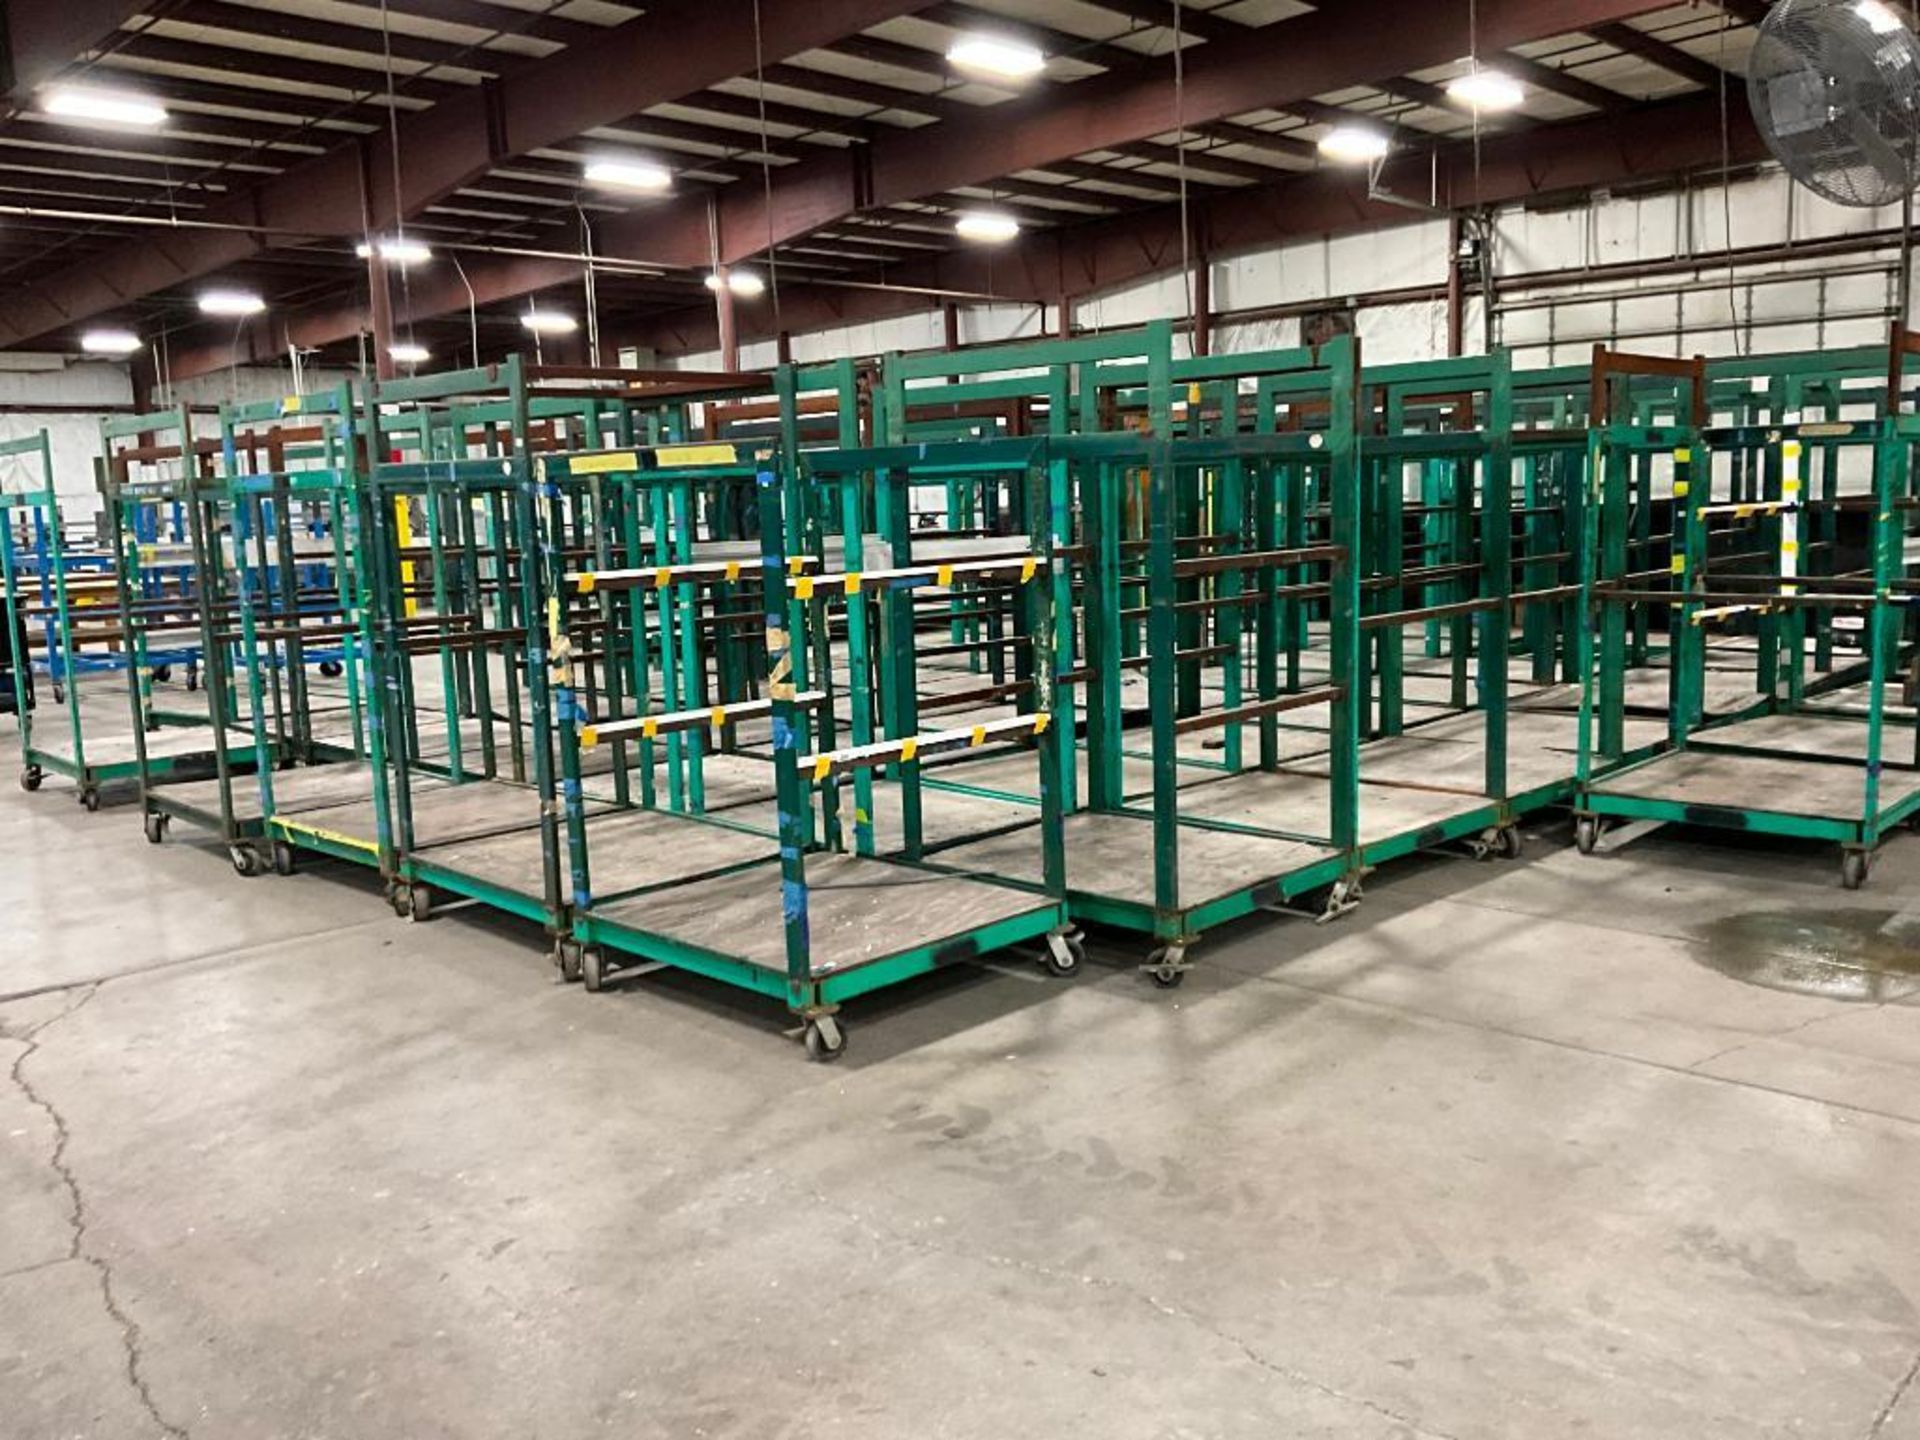 (88) Storage Racks on Casters, 70" H x 48" W, x 44" D (Green) - Image 8 of 12